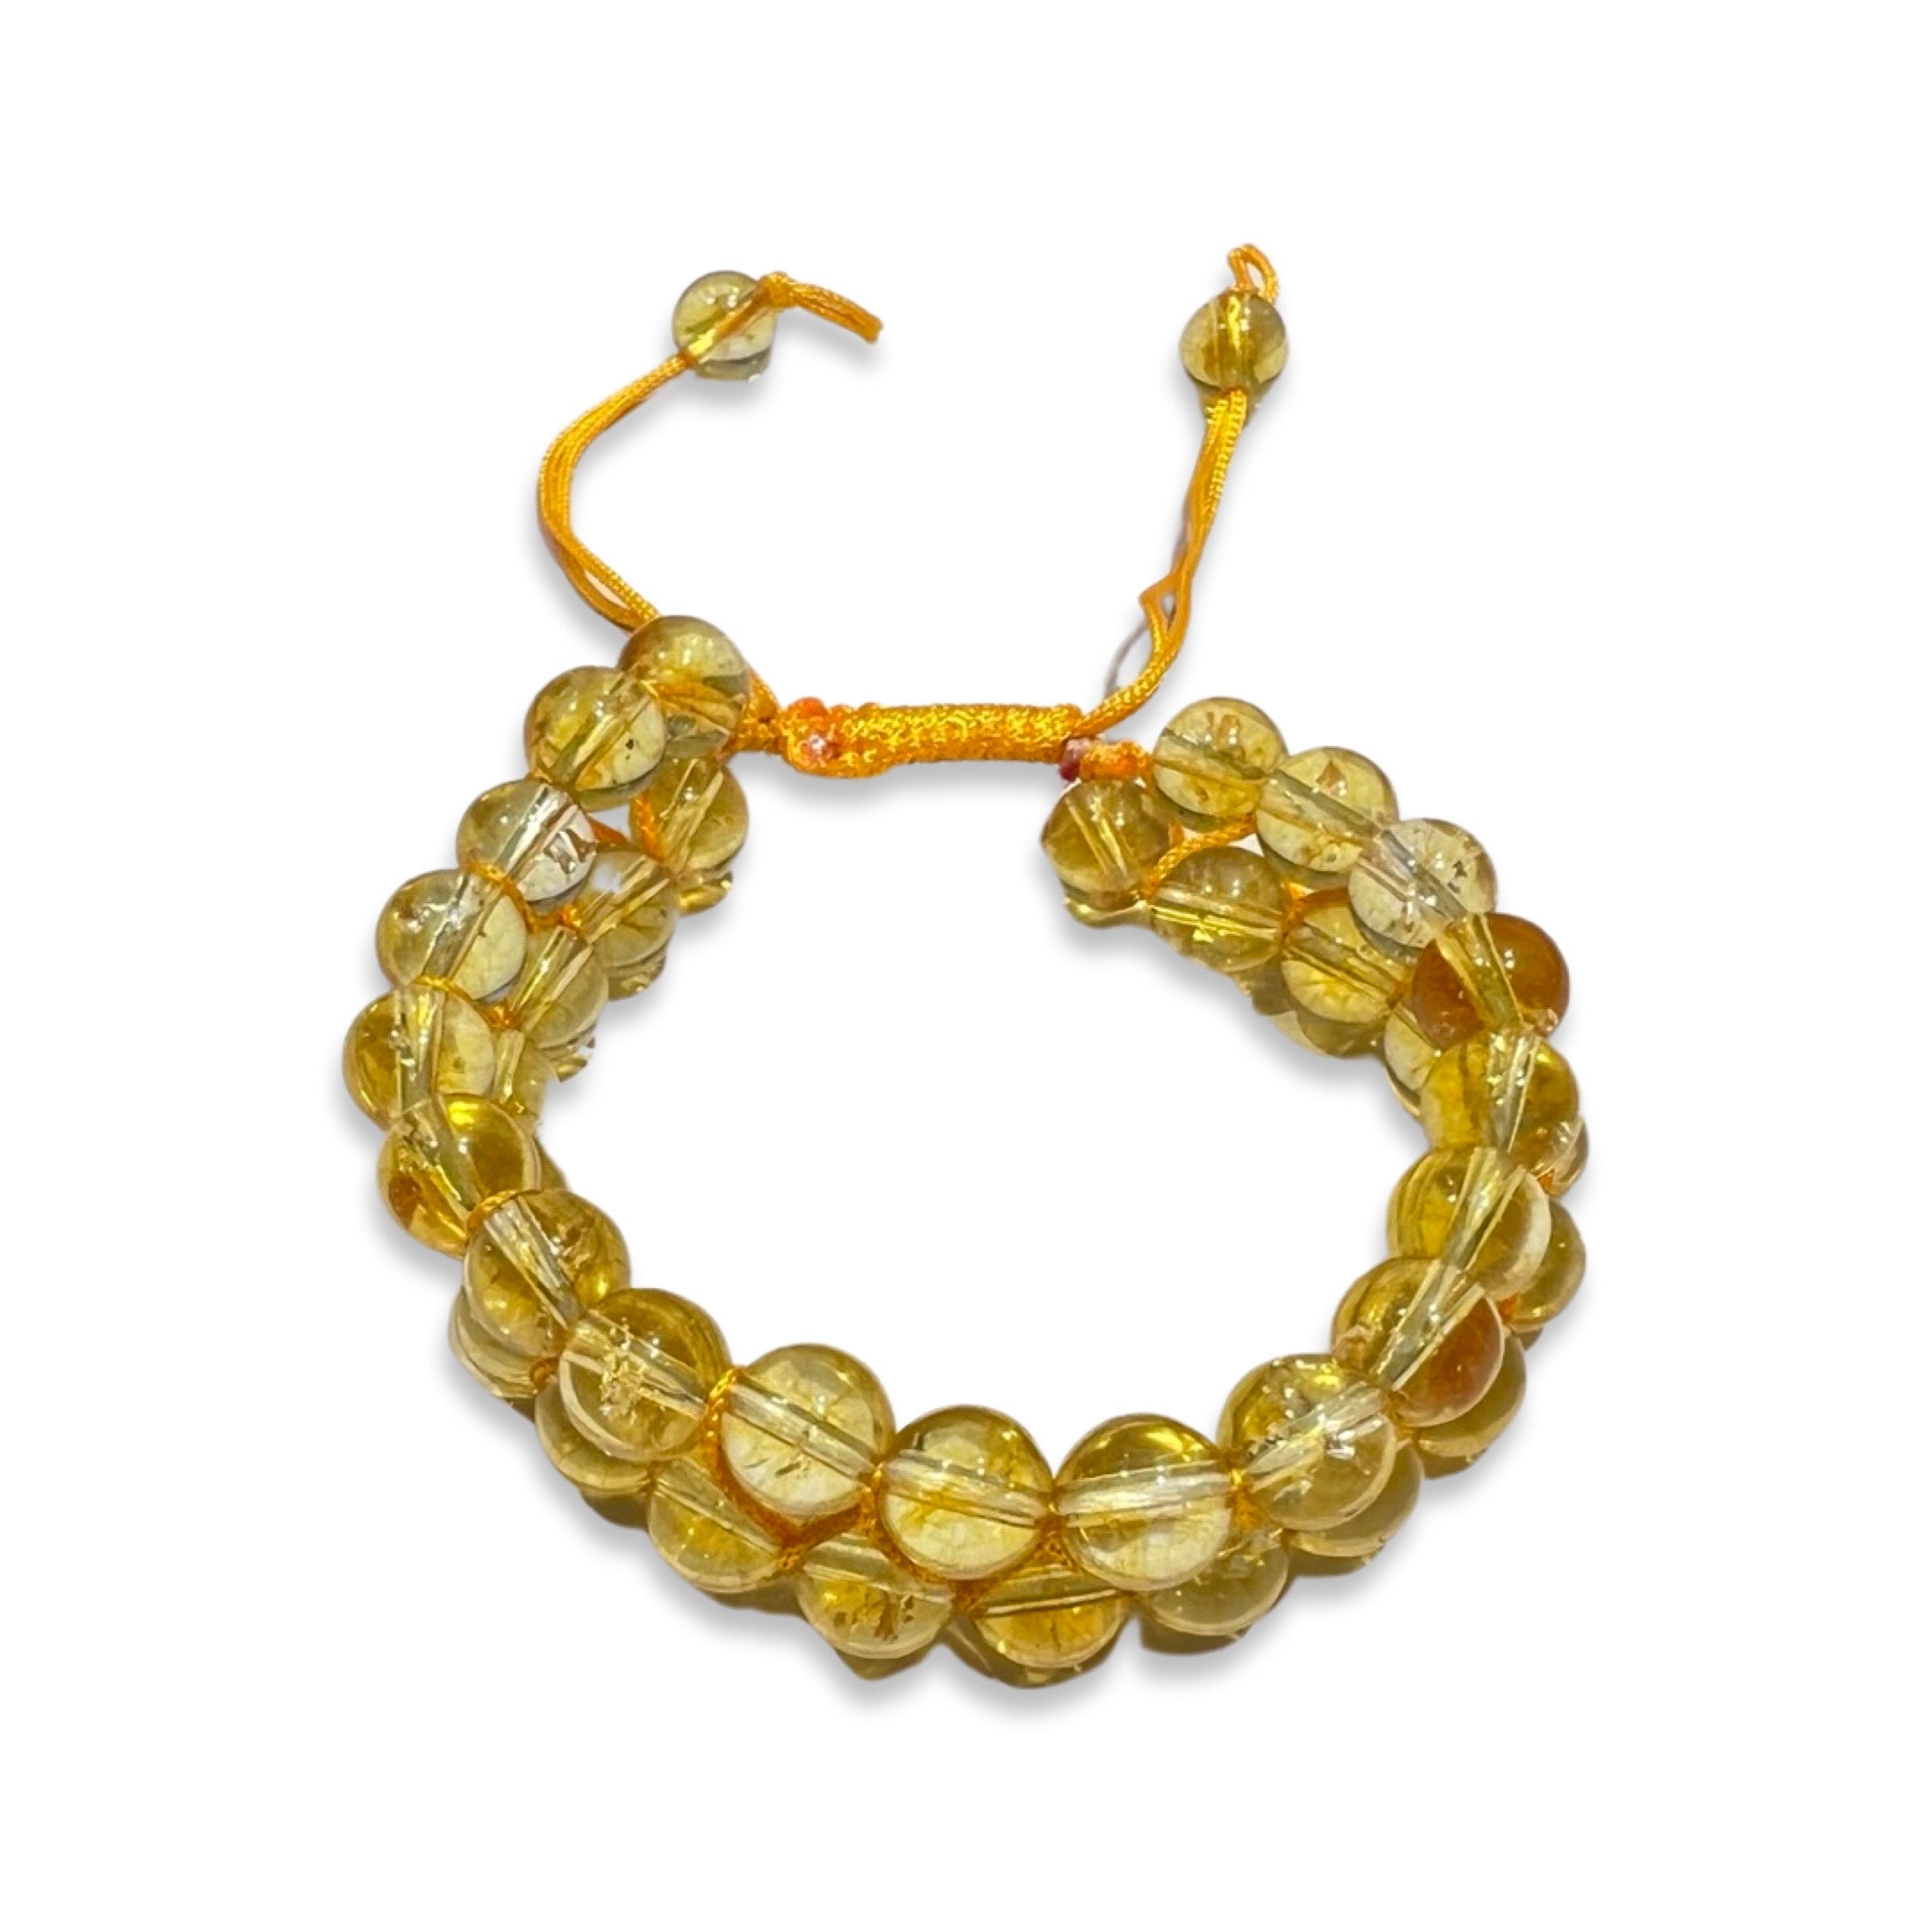 Buy Chitshakti Trust Yellow Calcite Precious Stone Bracelet for Women, Men  | Crystal with Healing Benefits - 18 Beads at Amazon.in